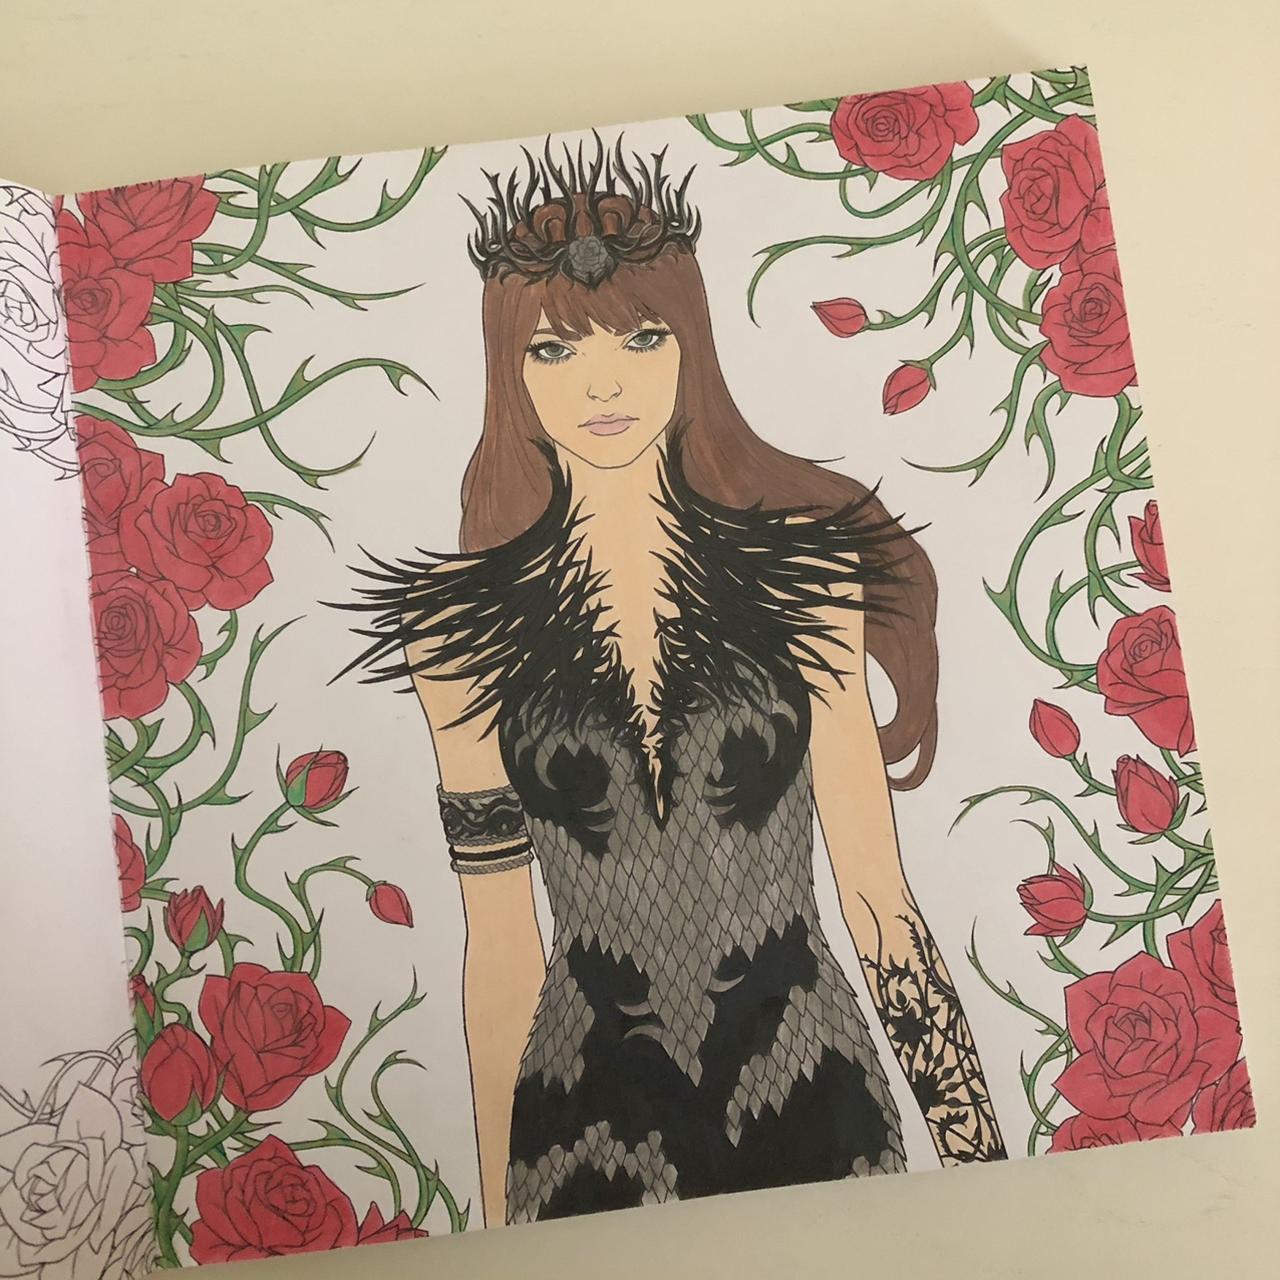 ACOTAR Coloring book  Coloring books, Coloring book art, A court of mist  and fury